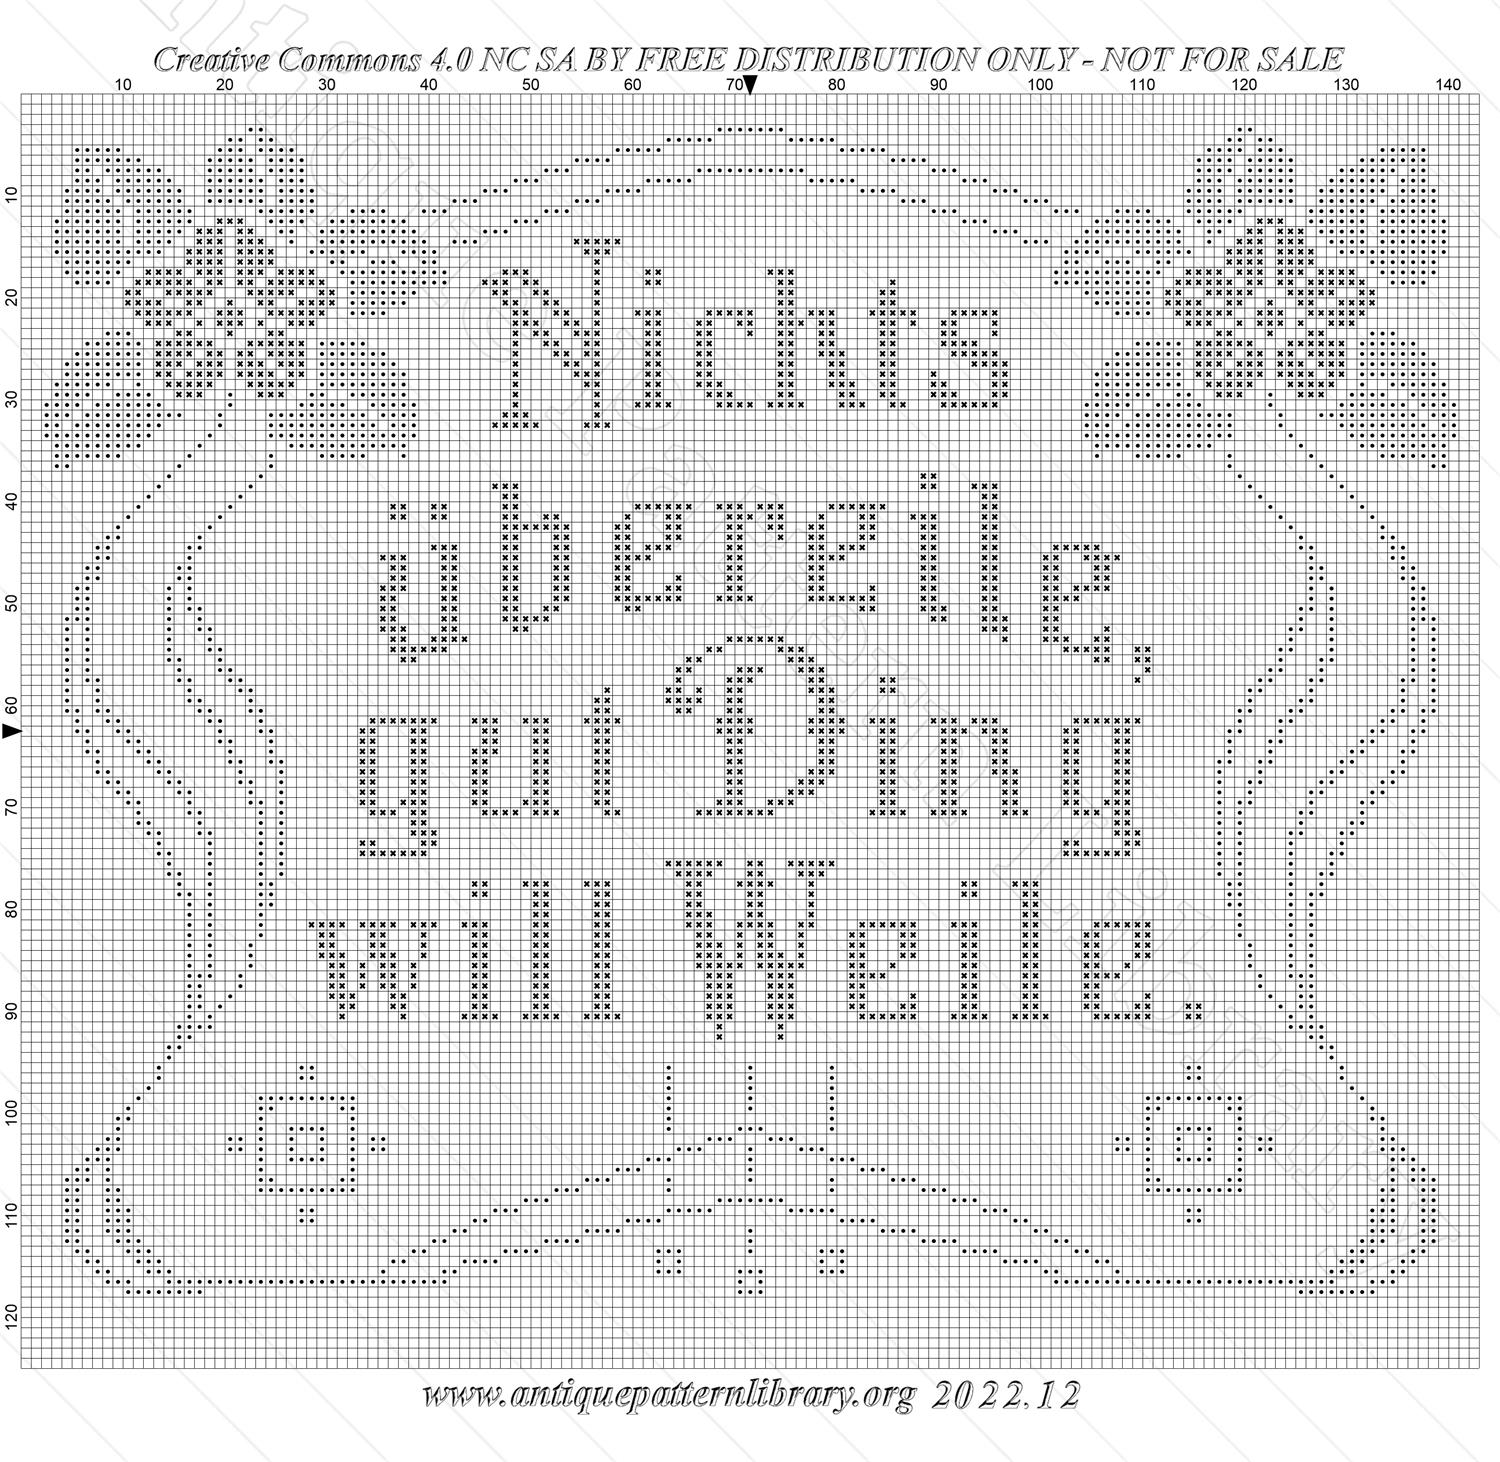 M-DK001 Eight traditional German maxims